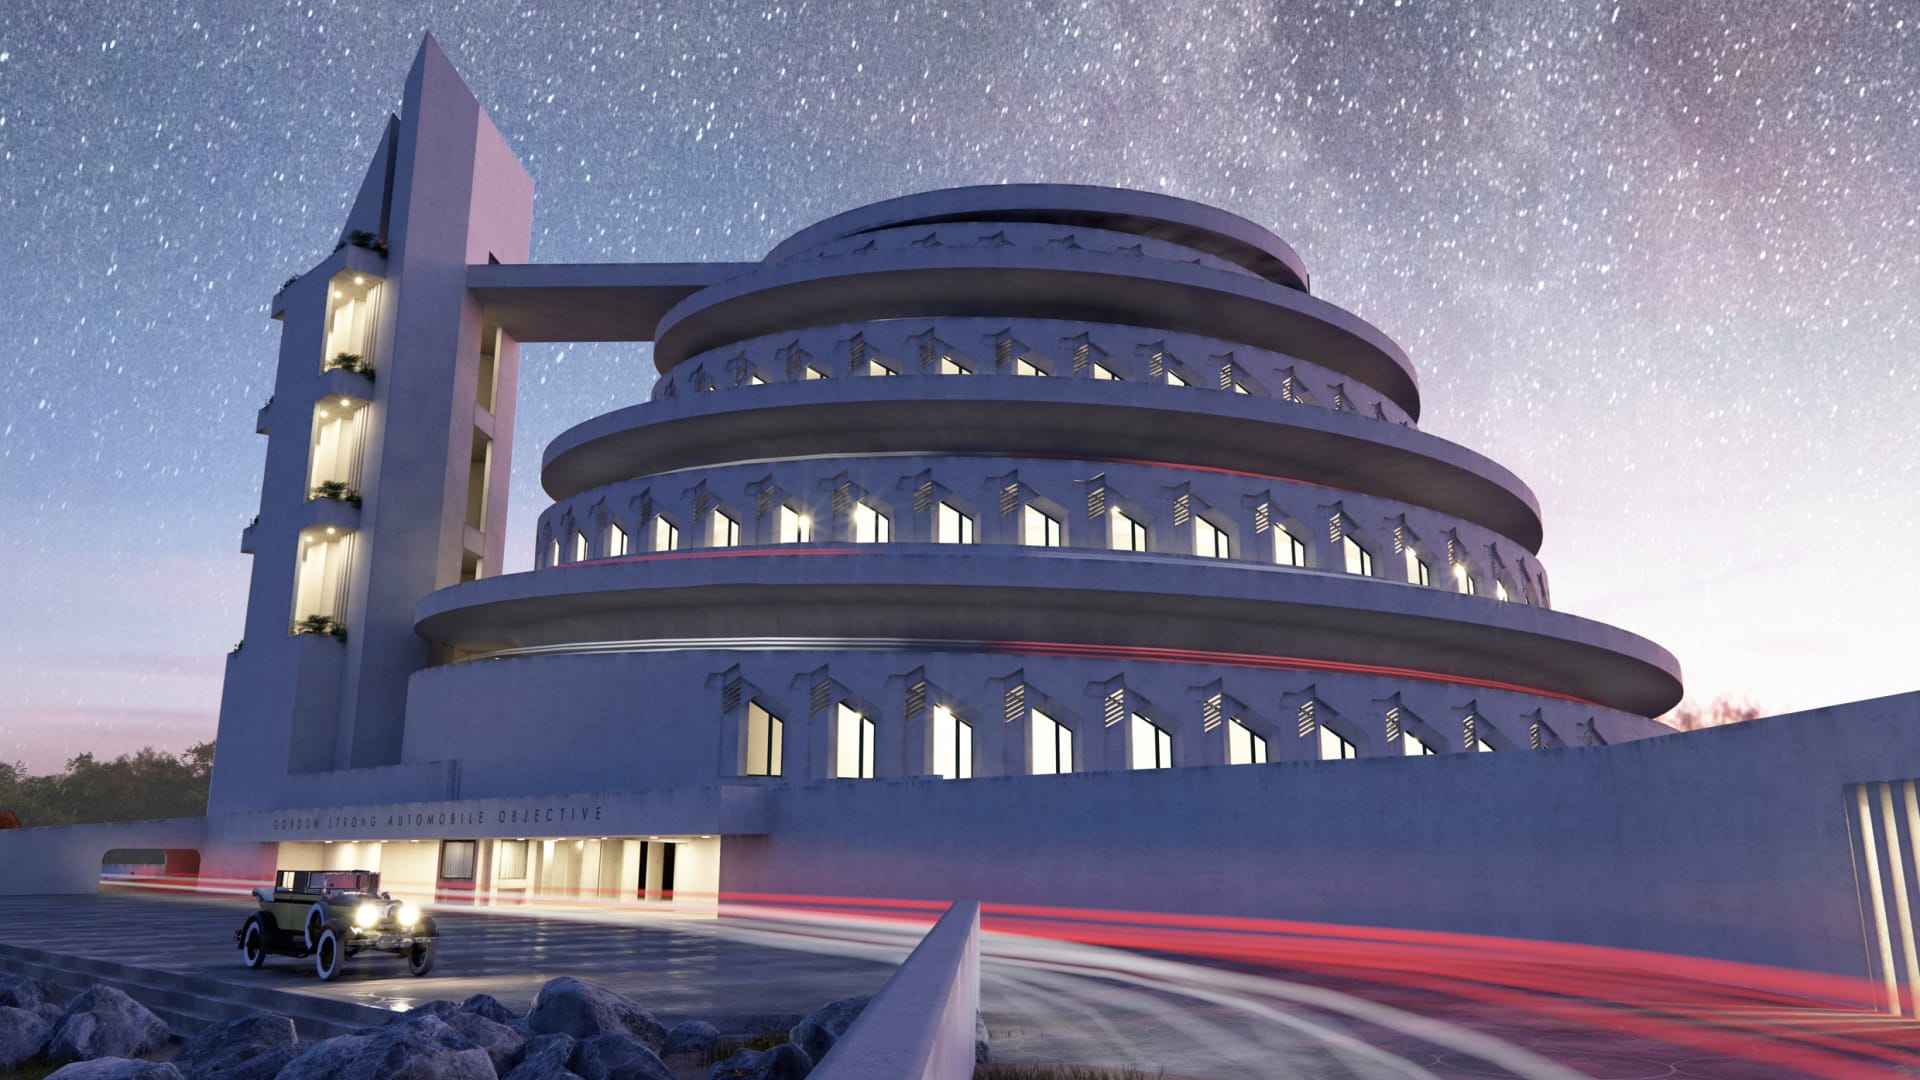 Here’s what Frank Lloyd Wright’s unbuilt designs would look like today